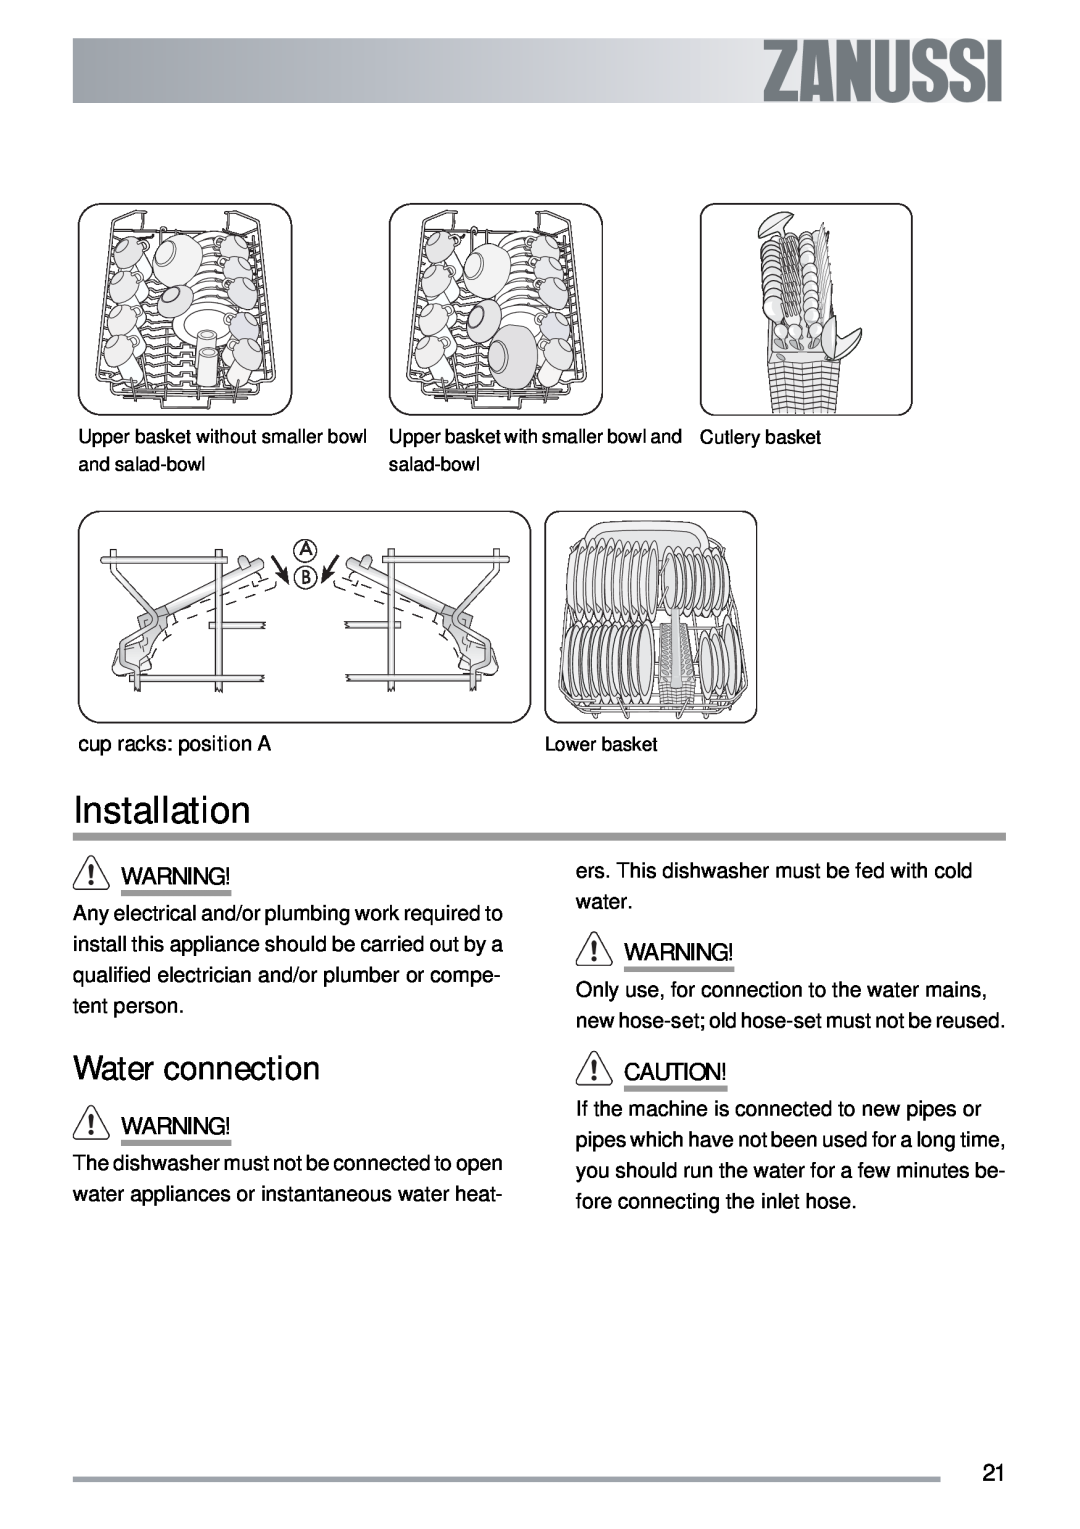 Zanussi ZSF 4143 Installation, Water connection, ers. This dishwasher must be fed with cold water, cup racks position A 